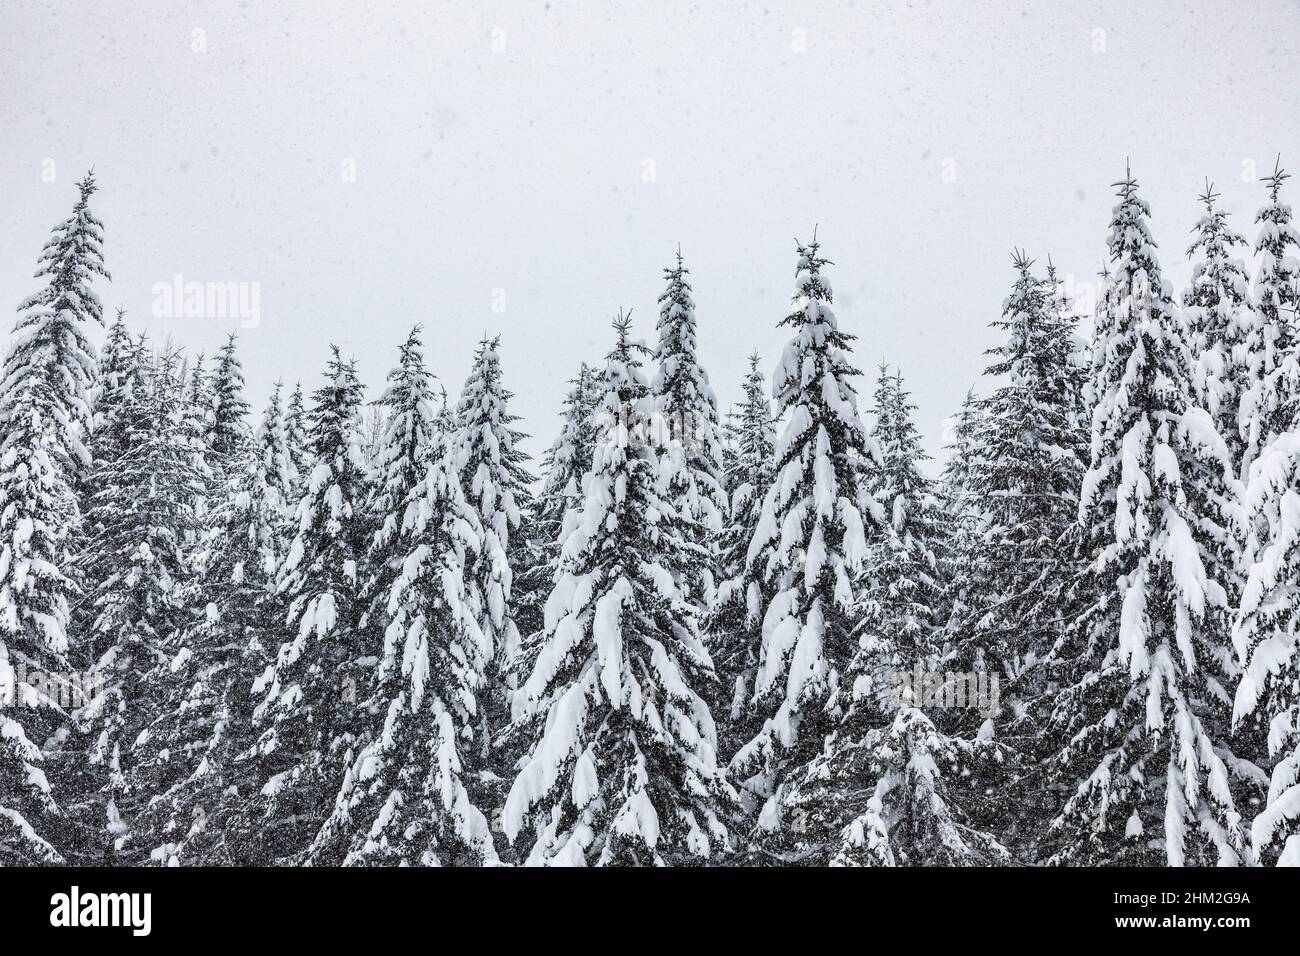 Heavy snow falling from the sky over trees in the cascades of Washington State. Stock Photo